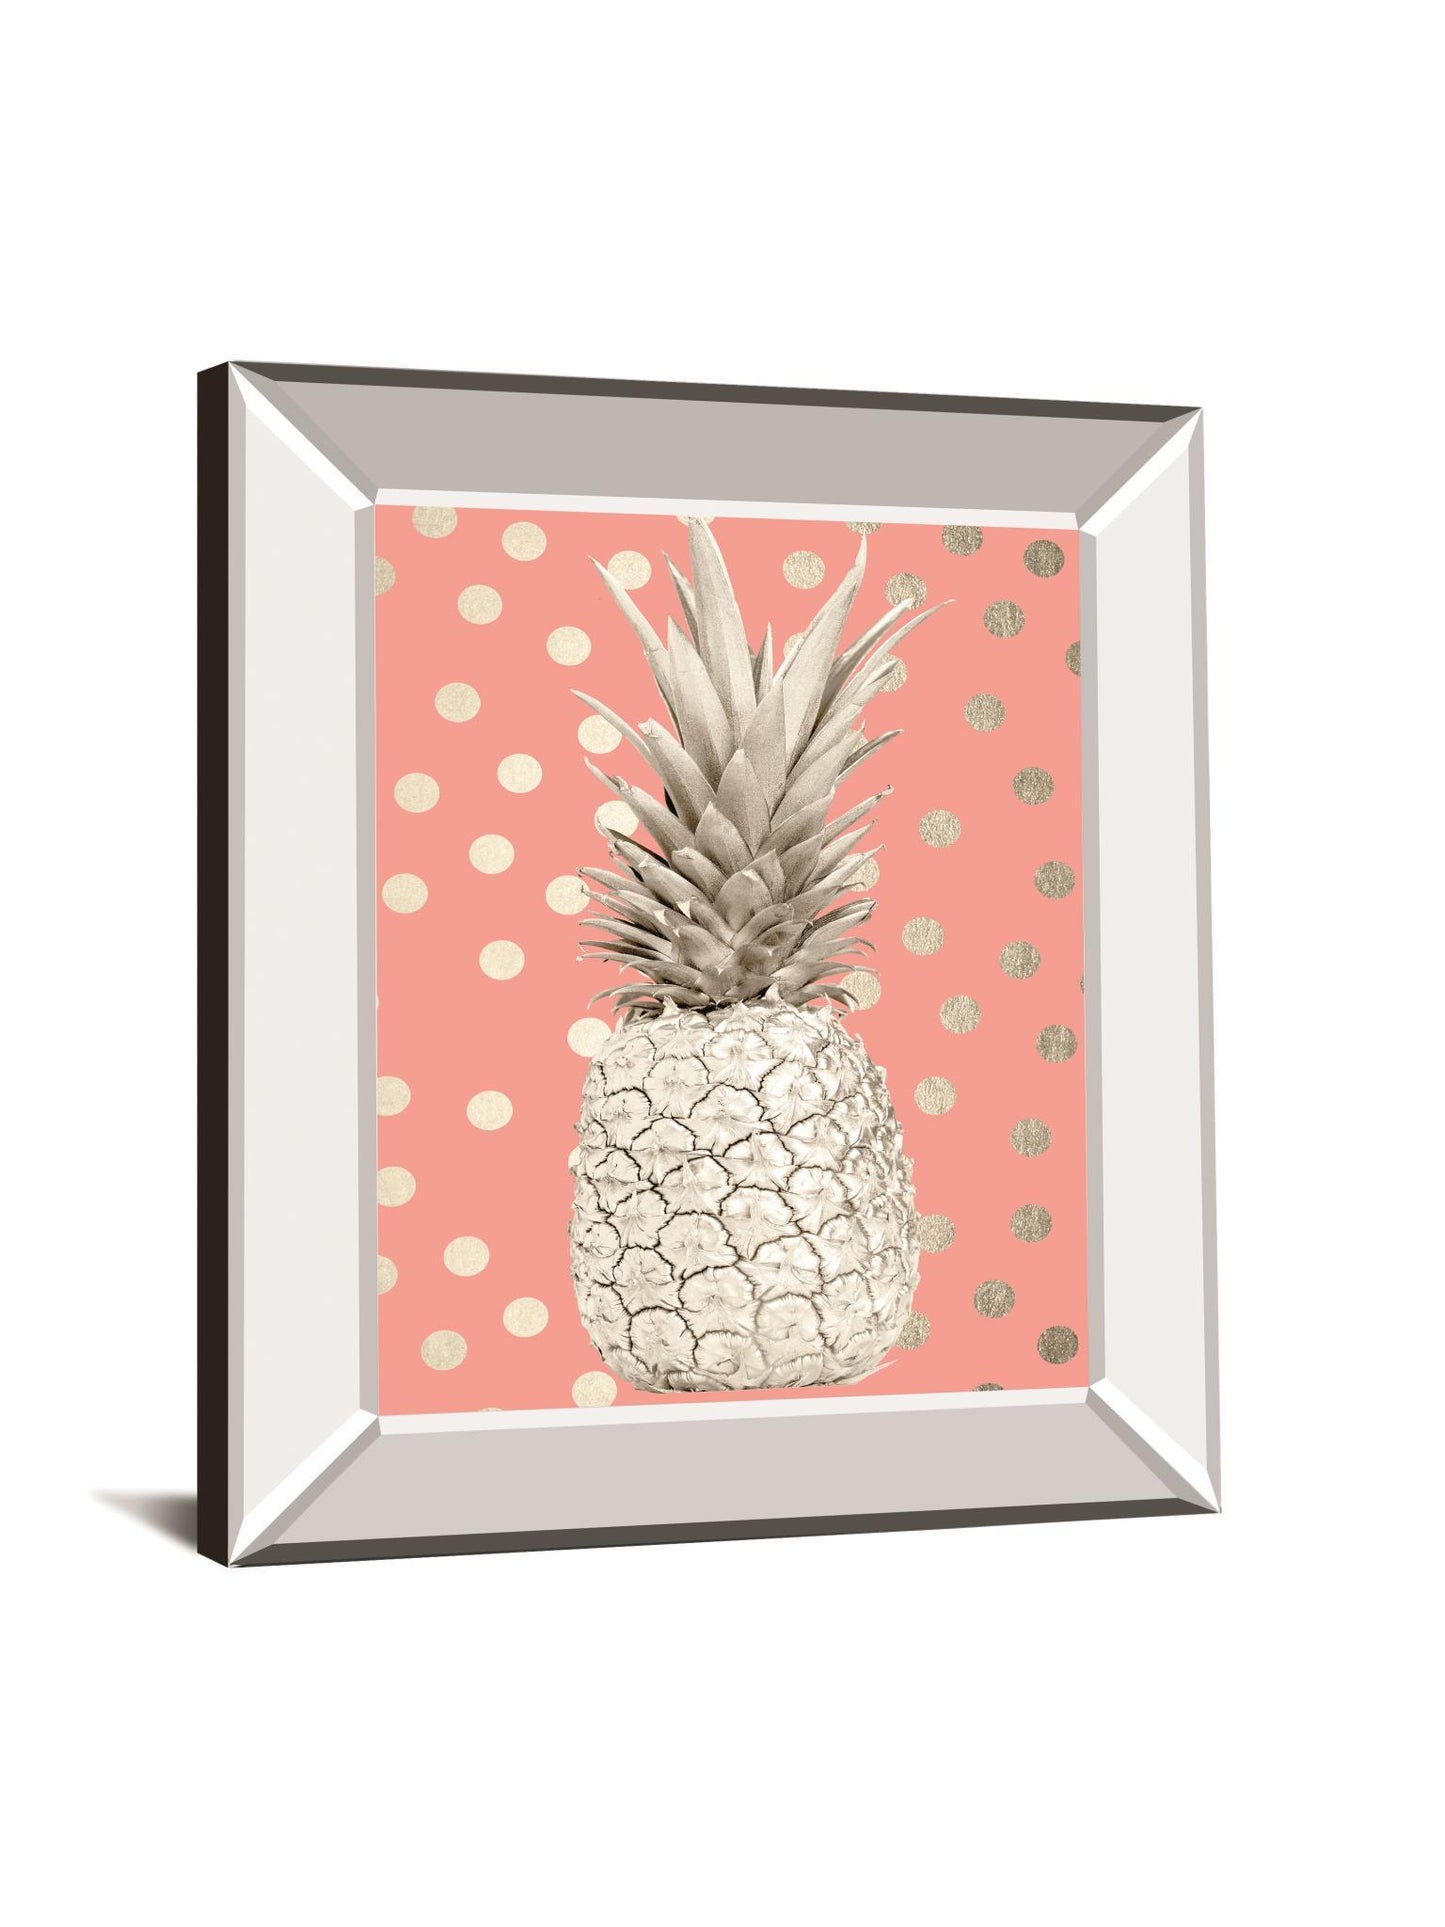 White Gold Pineapple On Polka Dots Pink By Nature Magick - Mirror Framed Print Wall Art - Pink